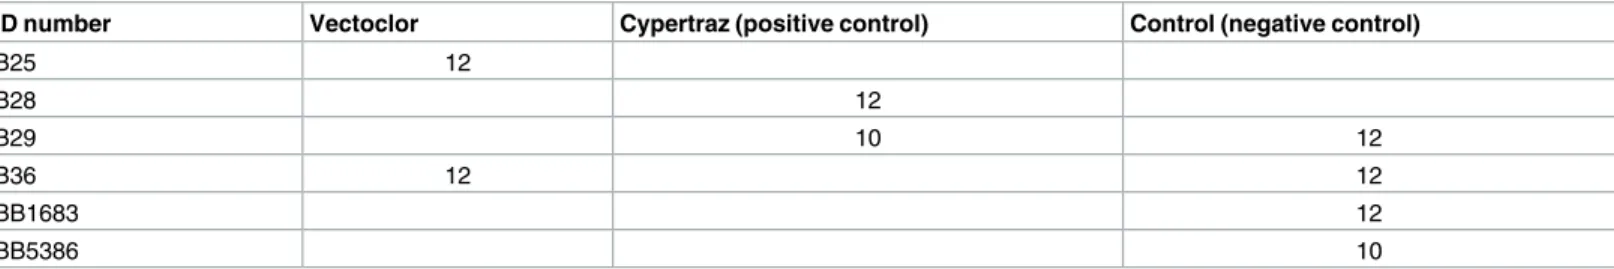 Table 1. Number of exposure sessions to tsetse flies for each animal by treatment. Two cattle (B29 and B36) were used alternatively as negative con- con-trols during the first replication and as treated animals during the second to reduce the importance of